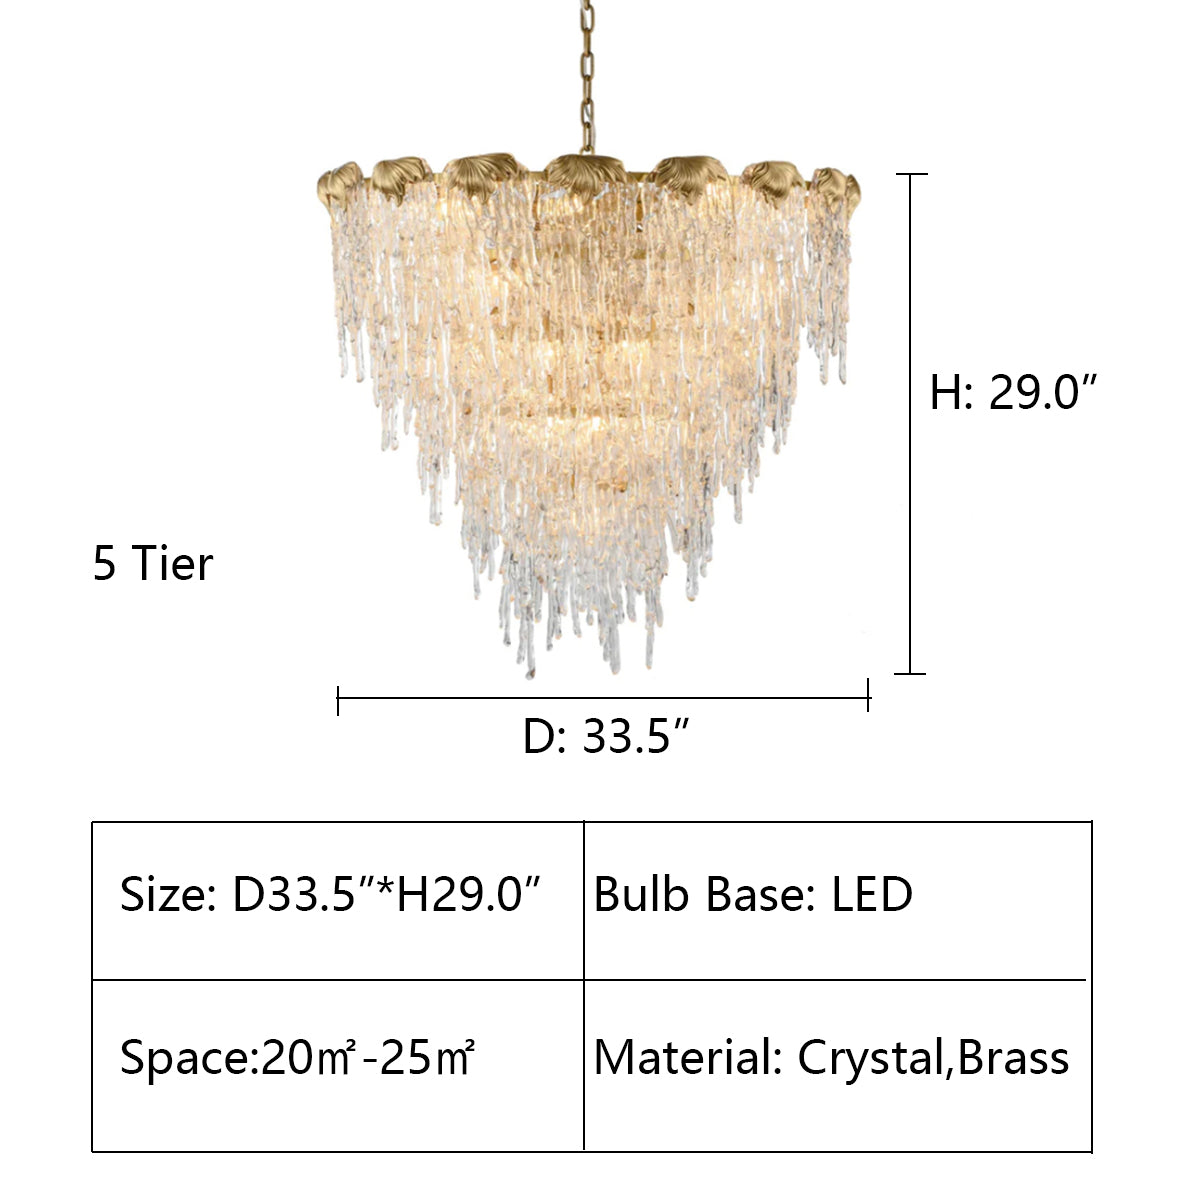 5Tier: D33.5"*H29.0" Aletta Melting Drop Crystal Glass Chandelier,chandelier,chandeliers,pendant,tiers,laters,multi-tier,multi-layer,oversized,huge,big,large,extra large,crystal,brass,Round,ceiling,living room,dining room,bedroom,foyer,stairs,entrys,hallway